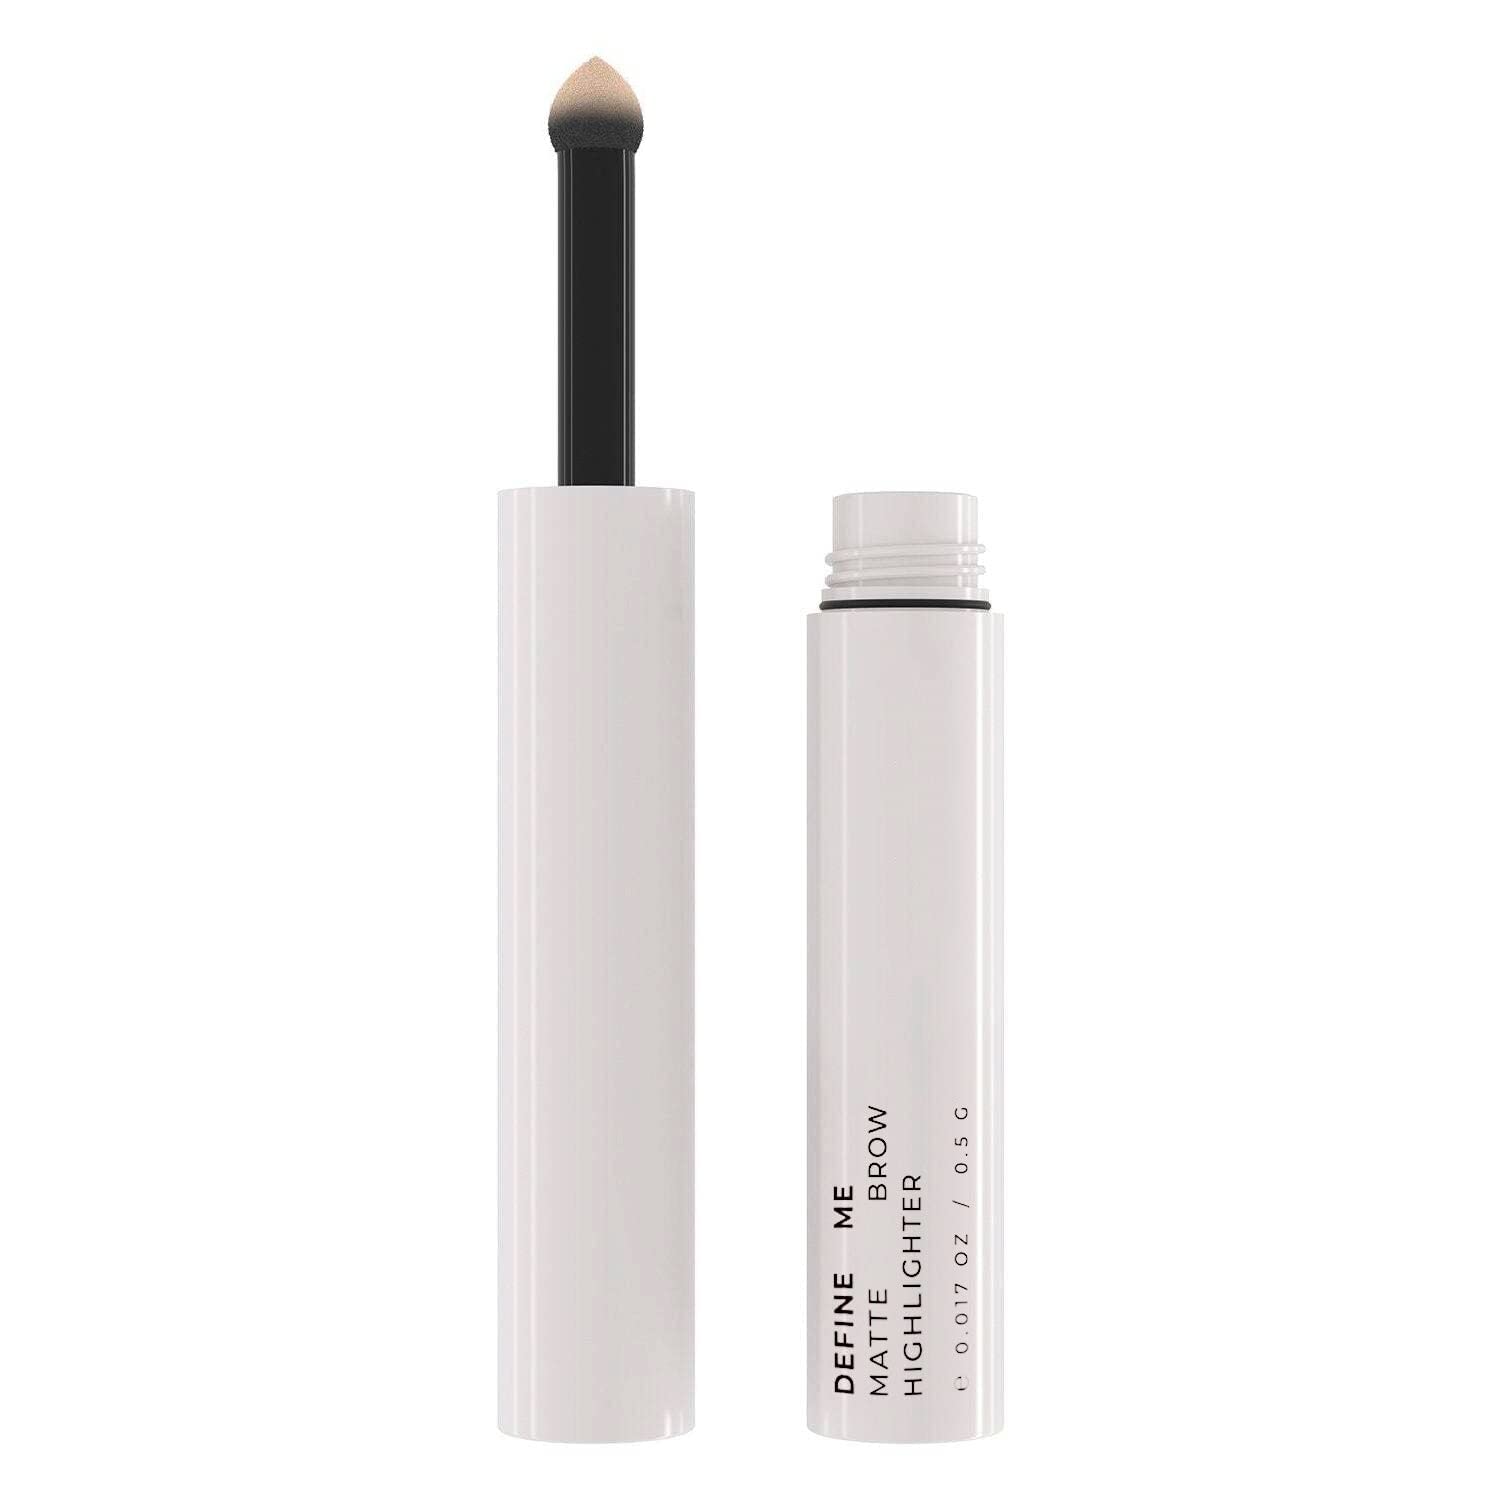 MADLUVV Define Me Eyebrow Highlighter, Last All Day, Accentuate Arches for Brighter Younger Looking Eyes, Universally attering for All Skin Shades, Hypoallergenic and Cruelty Free (Matte)